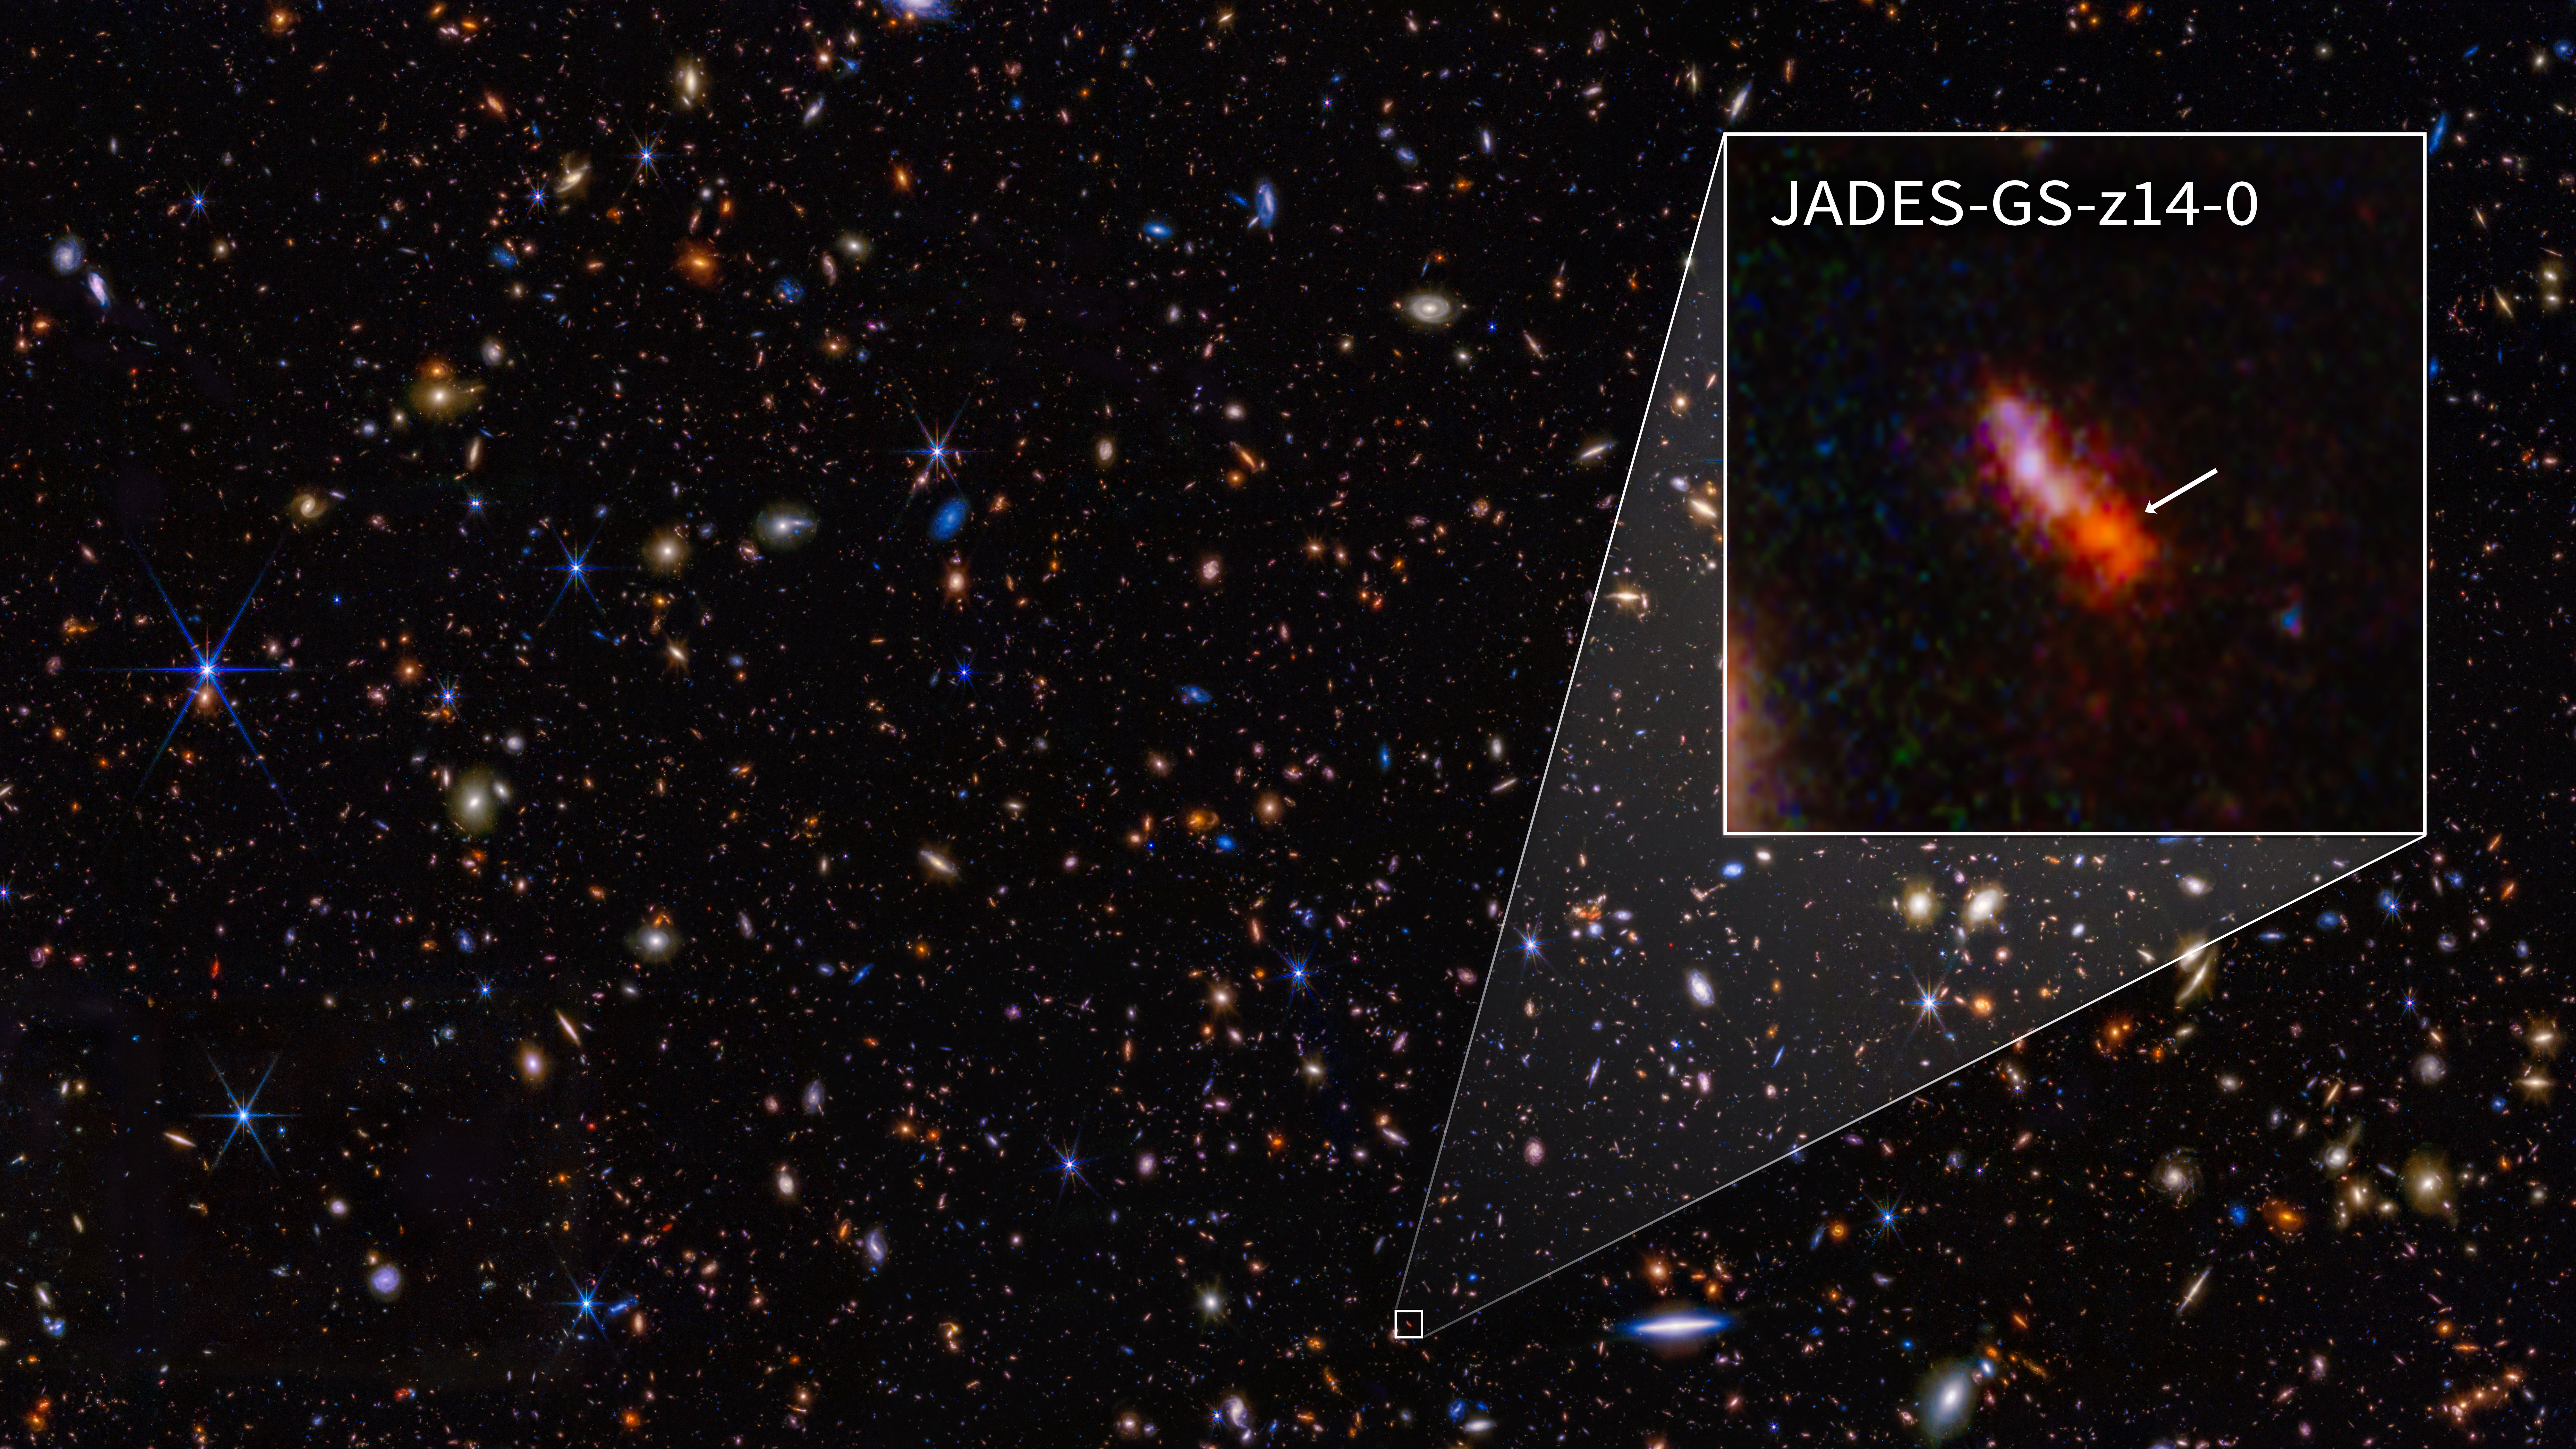 Earliest and most distant galaxy ever photographed with James Webb Space Telescope